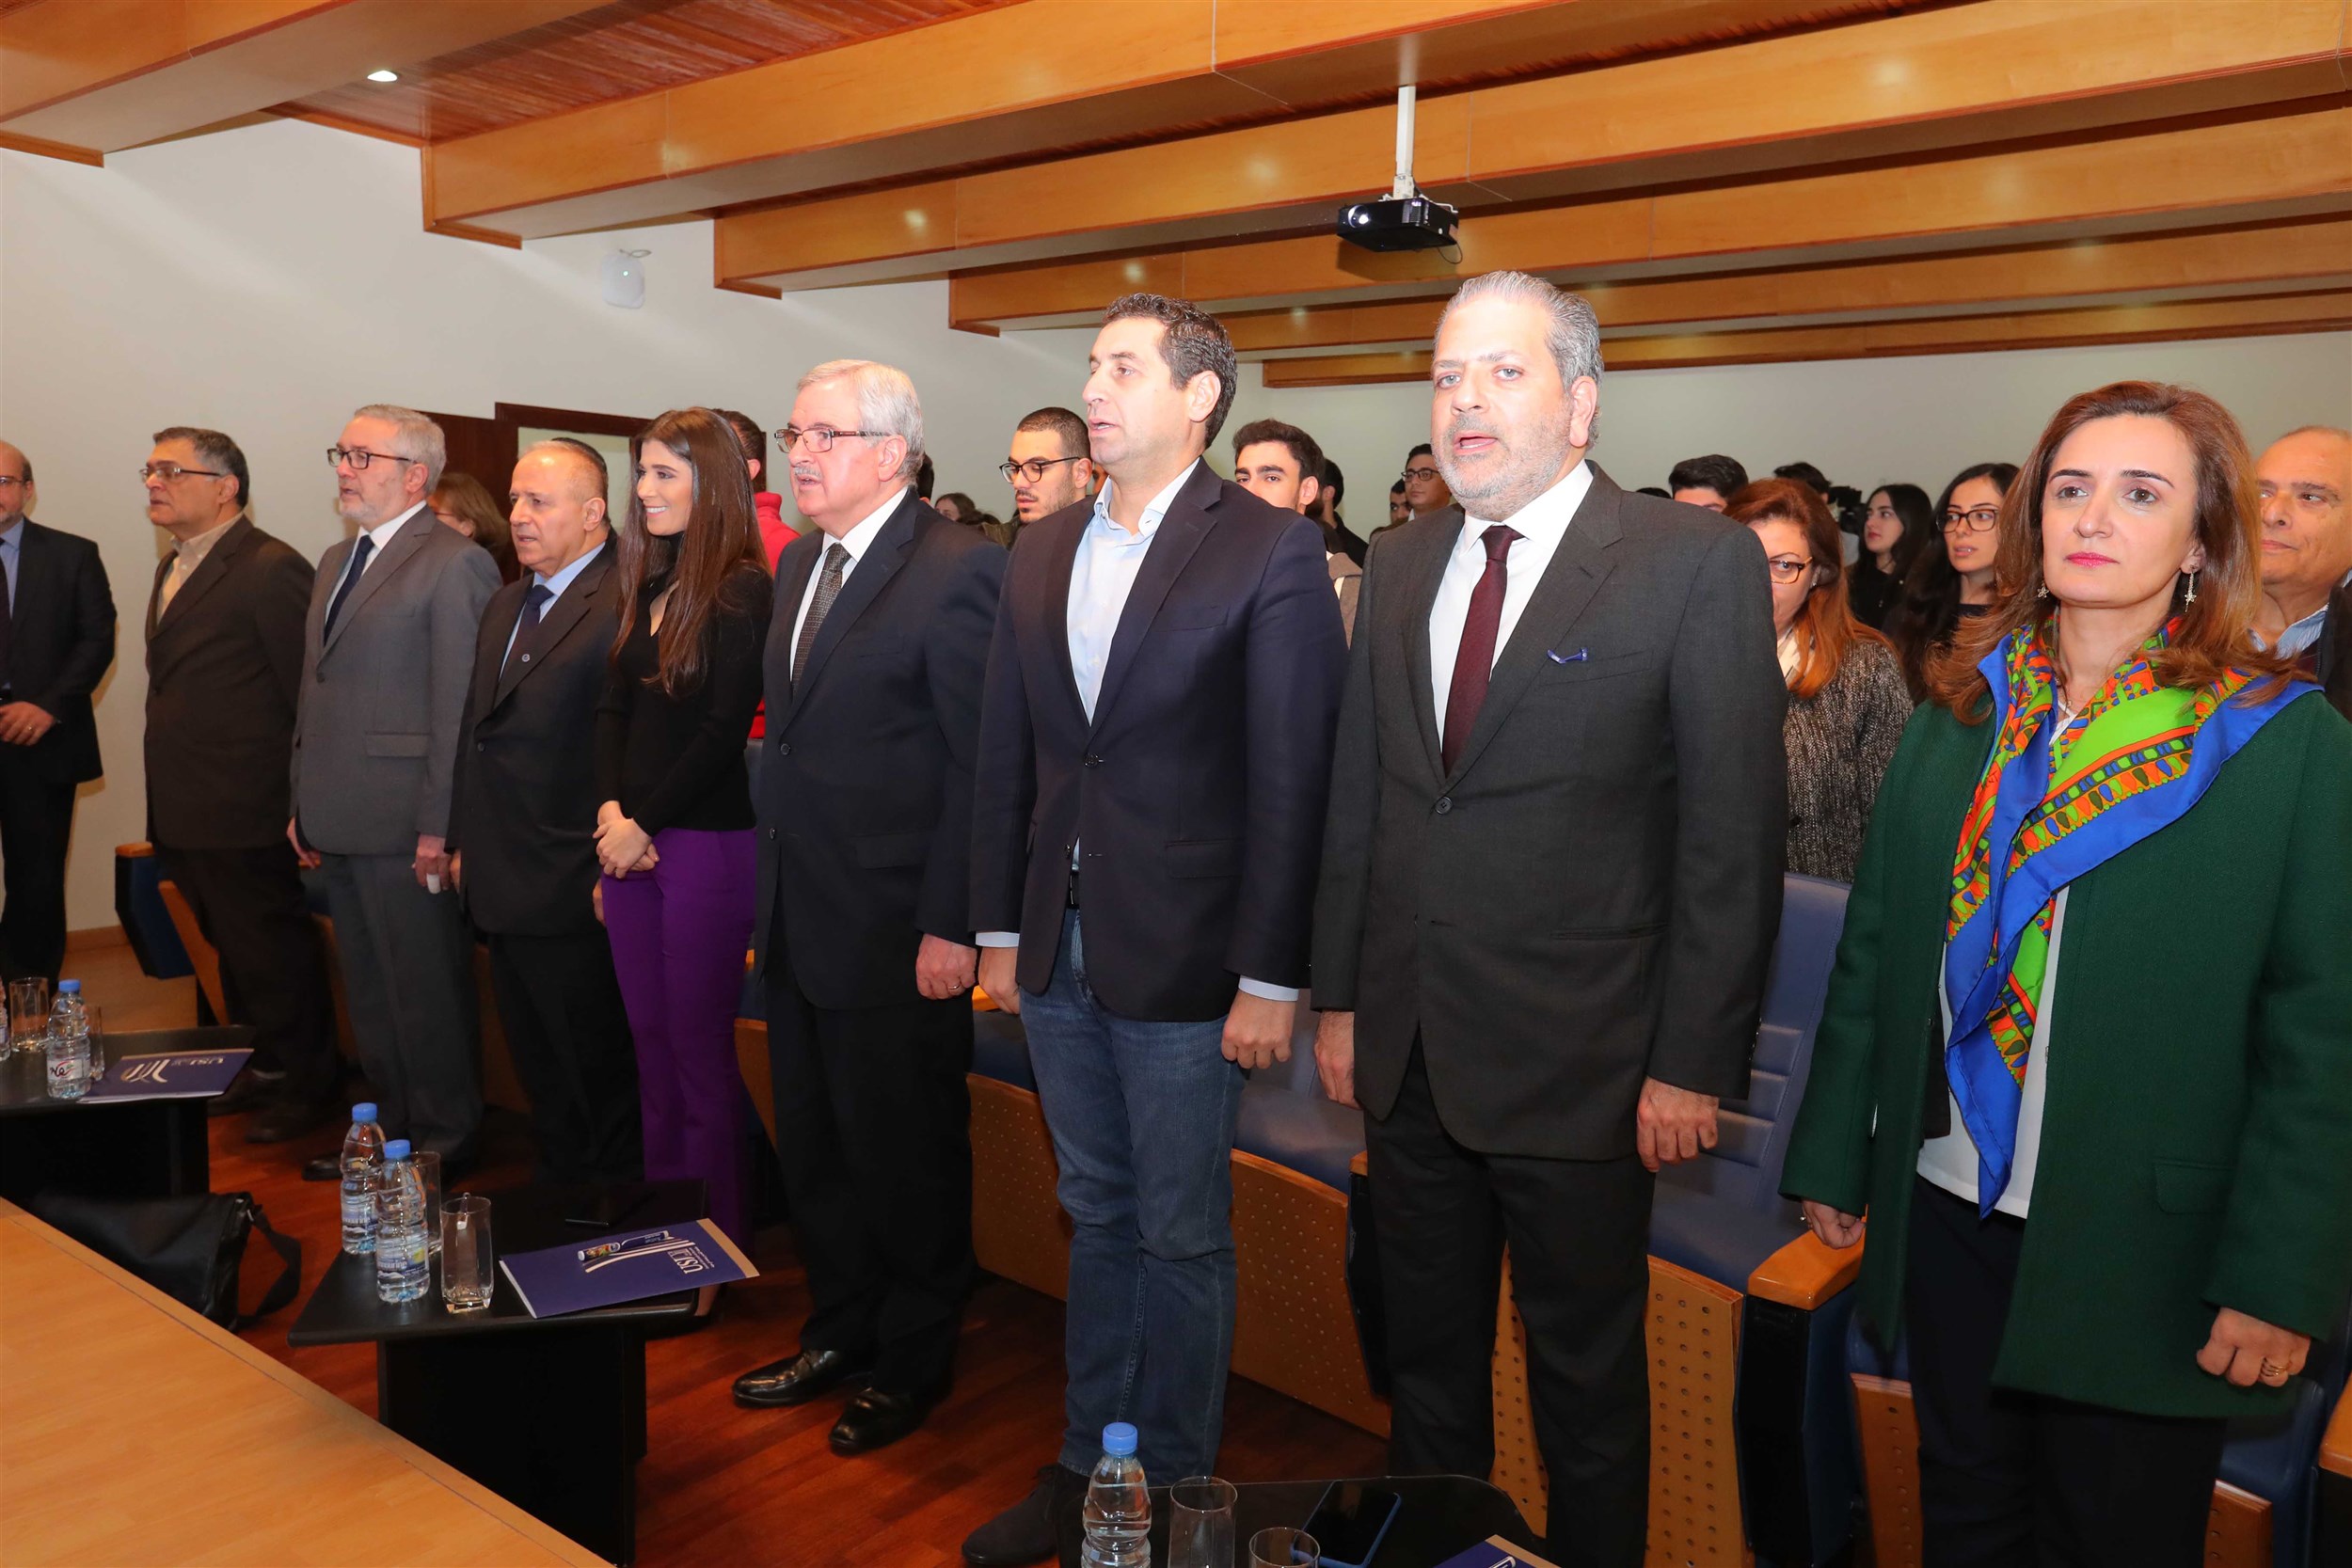 president professor salim daccach, president of the iaaf mrs. inas al jarmakani, minister of state for women affairs mr. jean oghassapian, member  of  the  parliament mr. eddy  maalouf, mr. maroun chammas, professor may sayegh and professor joseph mezher rise for the lebanese national anthem.